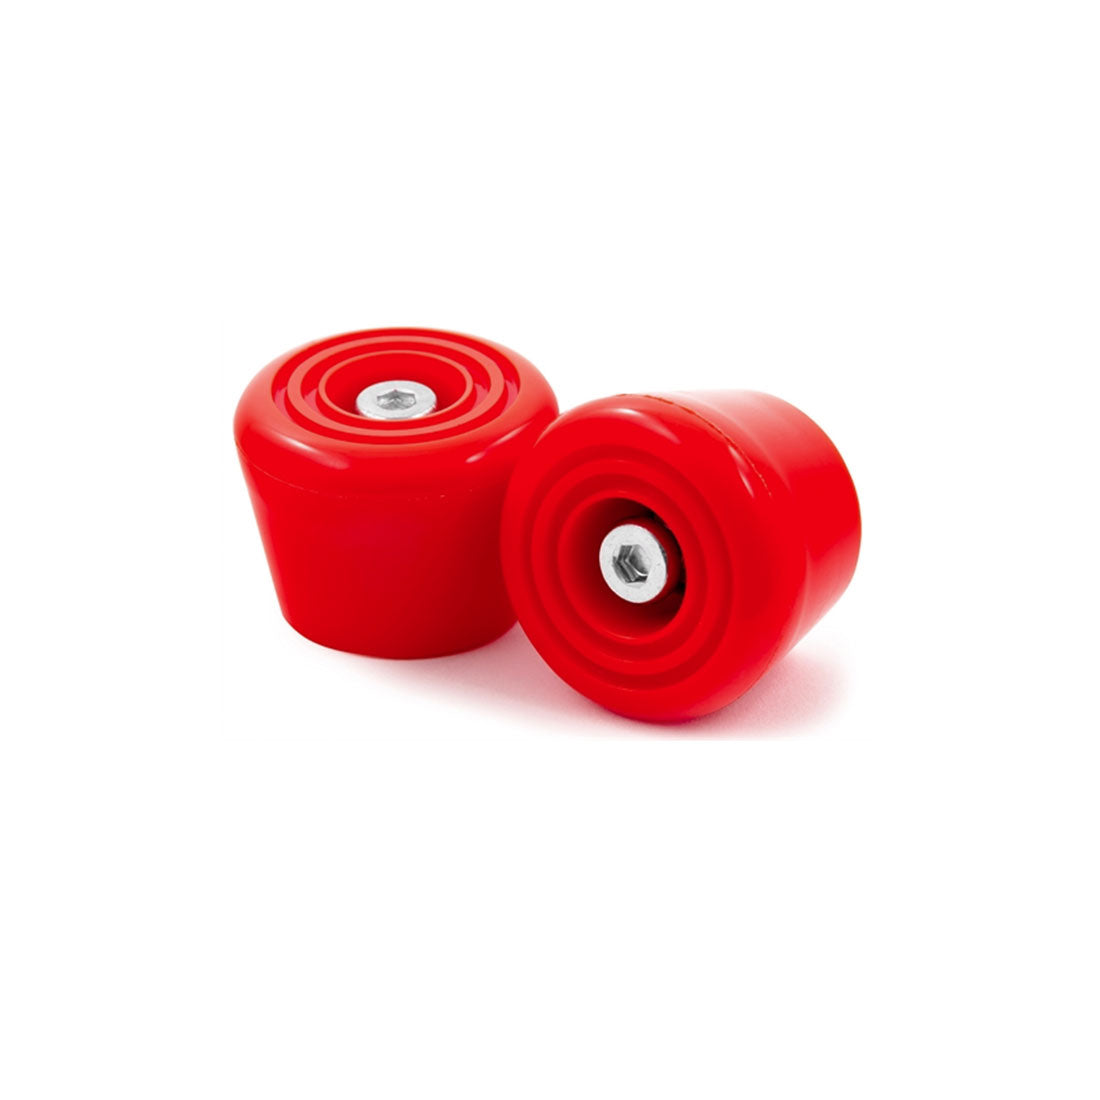 Rio Roller Toe Stops 2pk Red Roller Skate Hardware and Parts